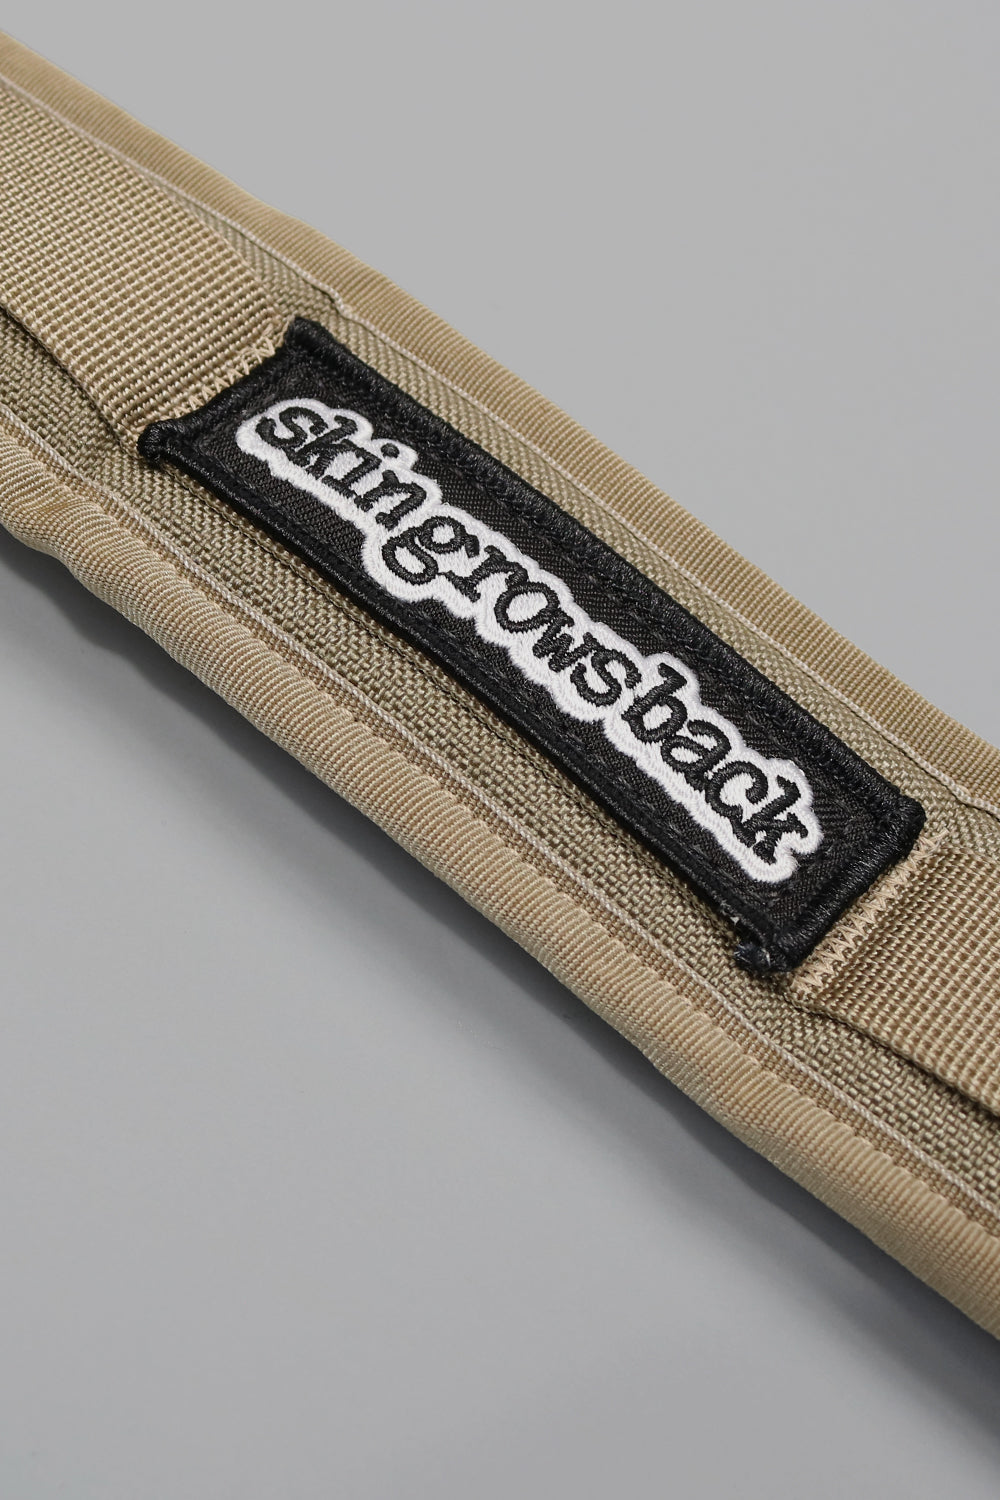 skingrowsback 3point cycling camera strap manufactured in australia stone